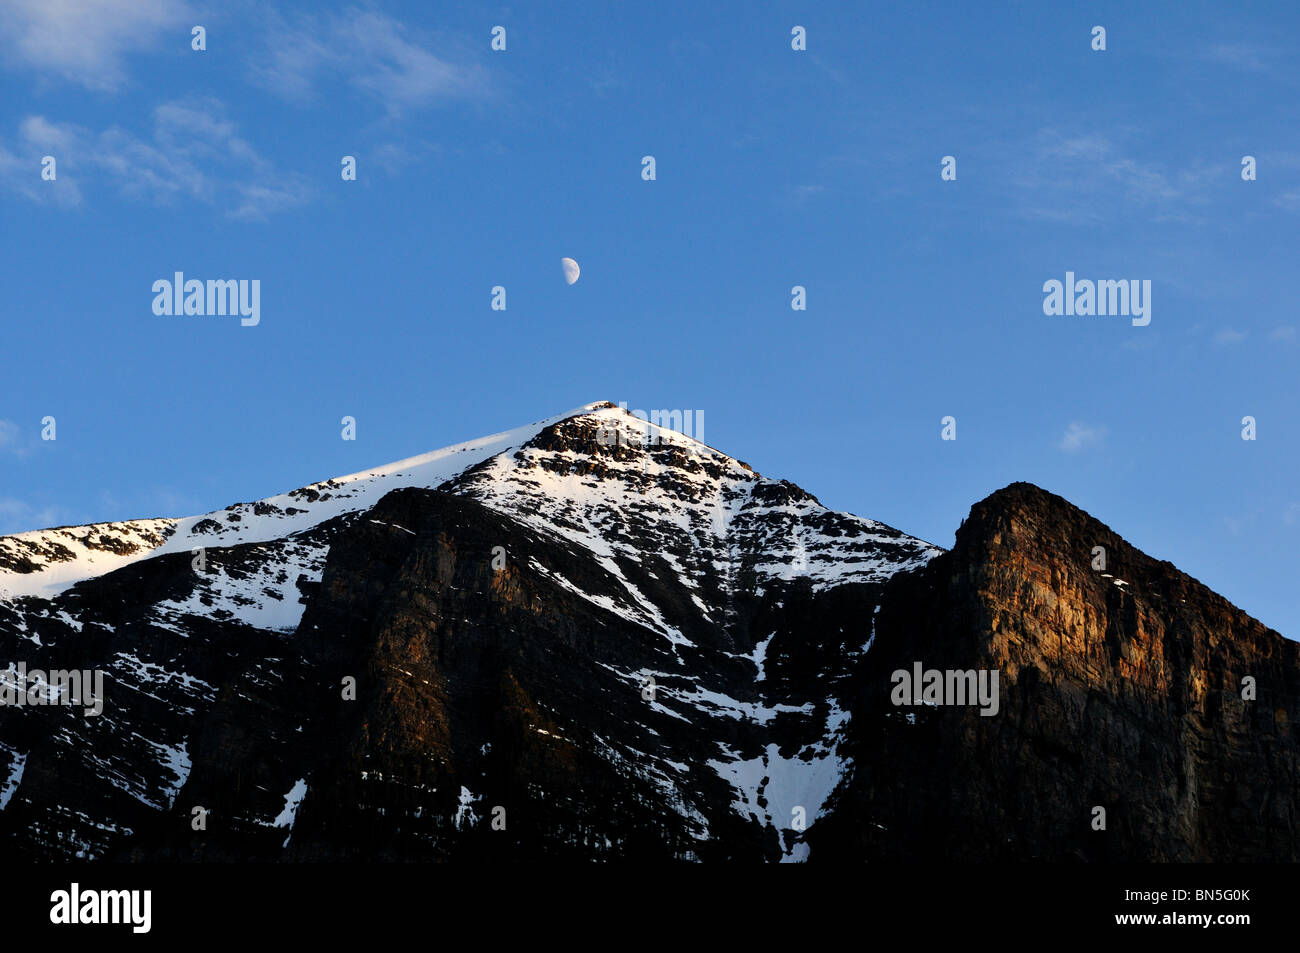 Moon hanging over mountains. Banff National Park, Alberta, Canada. Stock Photo